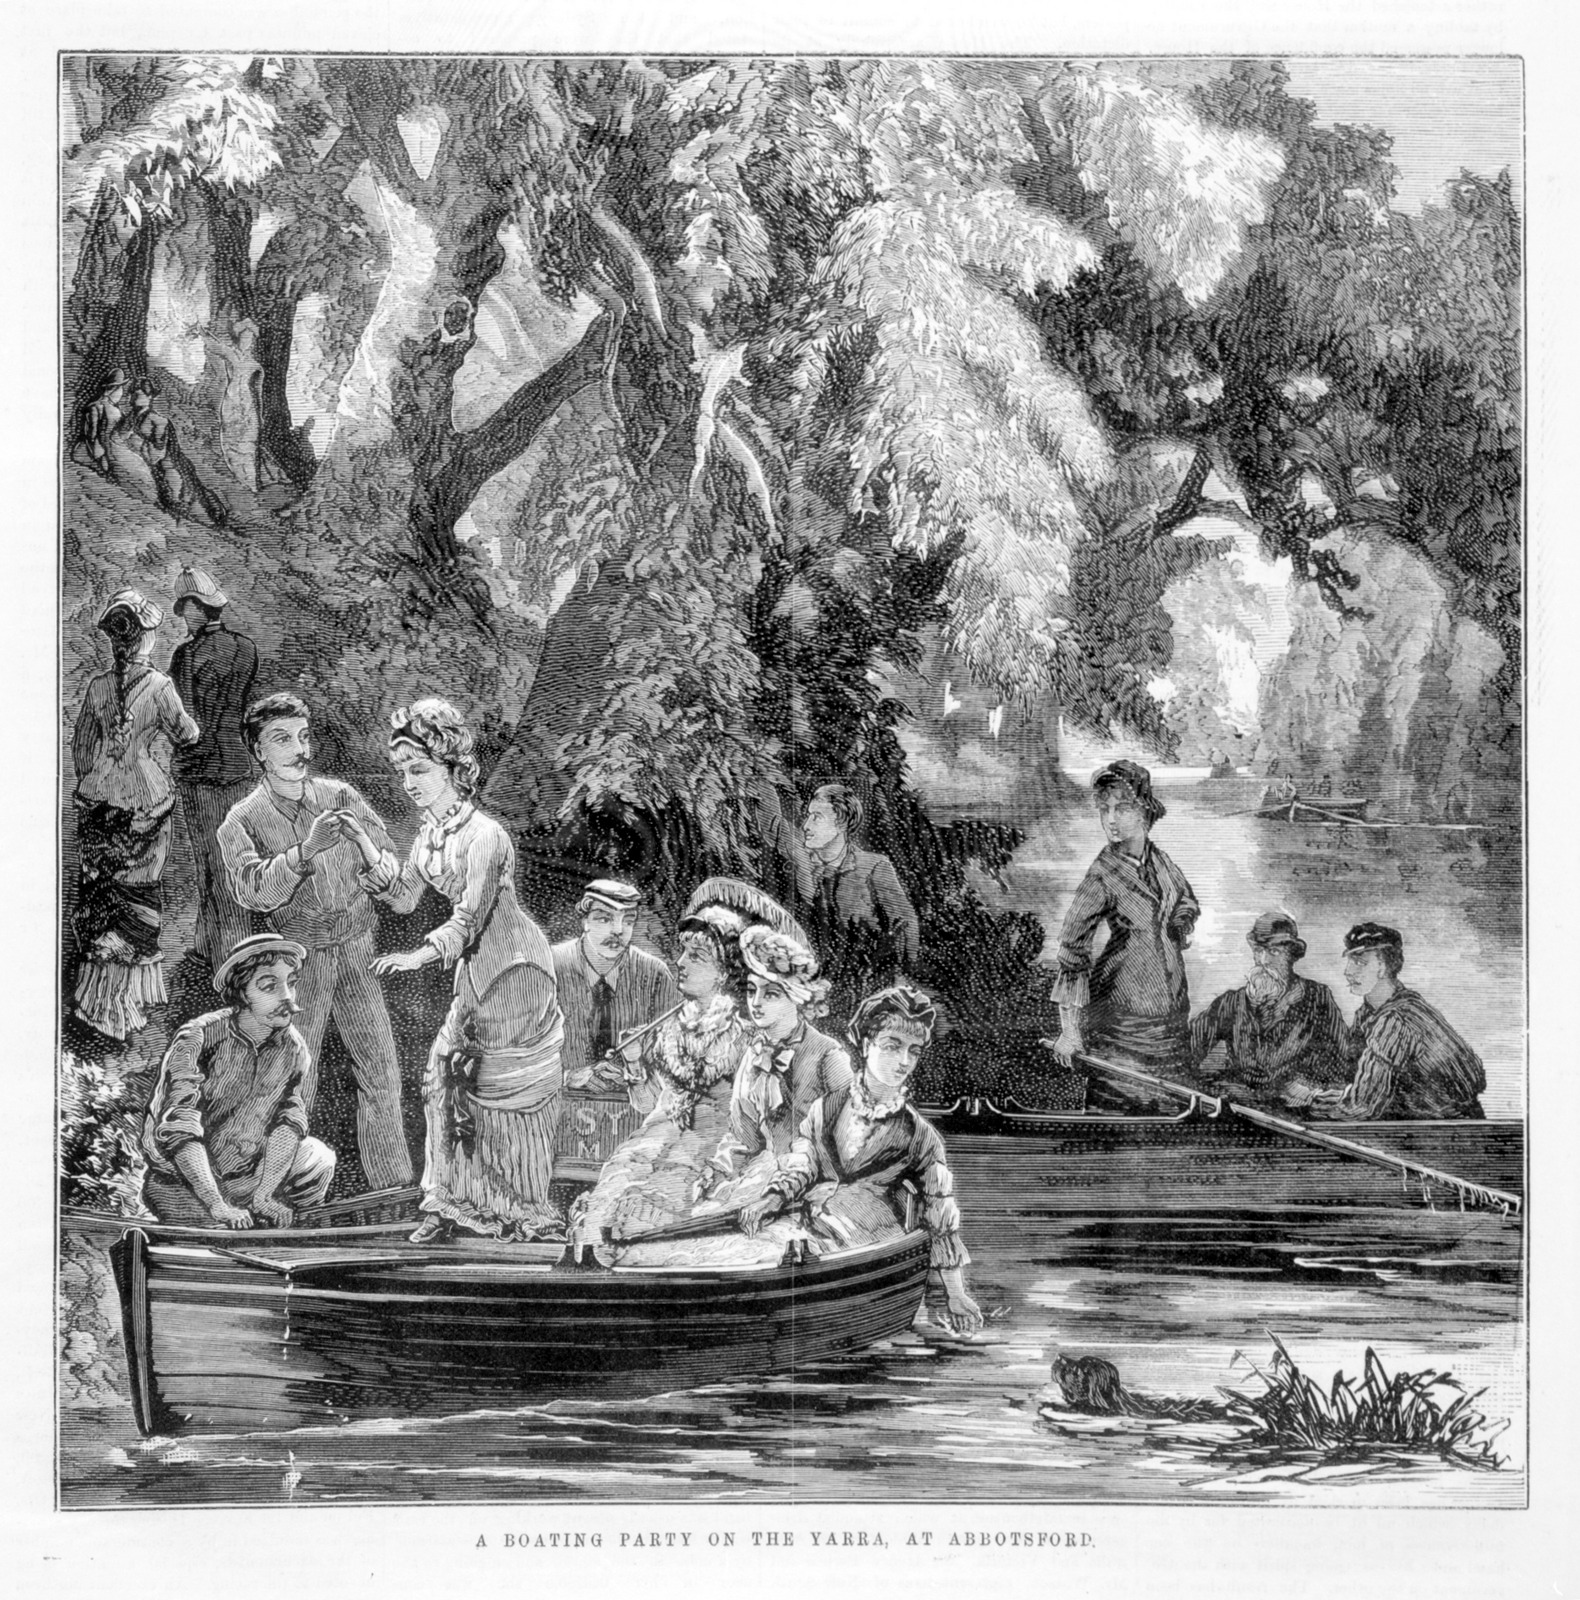 A boating Party on the Yarra, at Abbotsford.